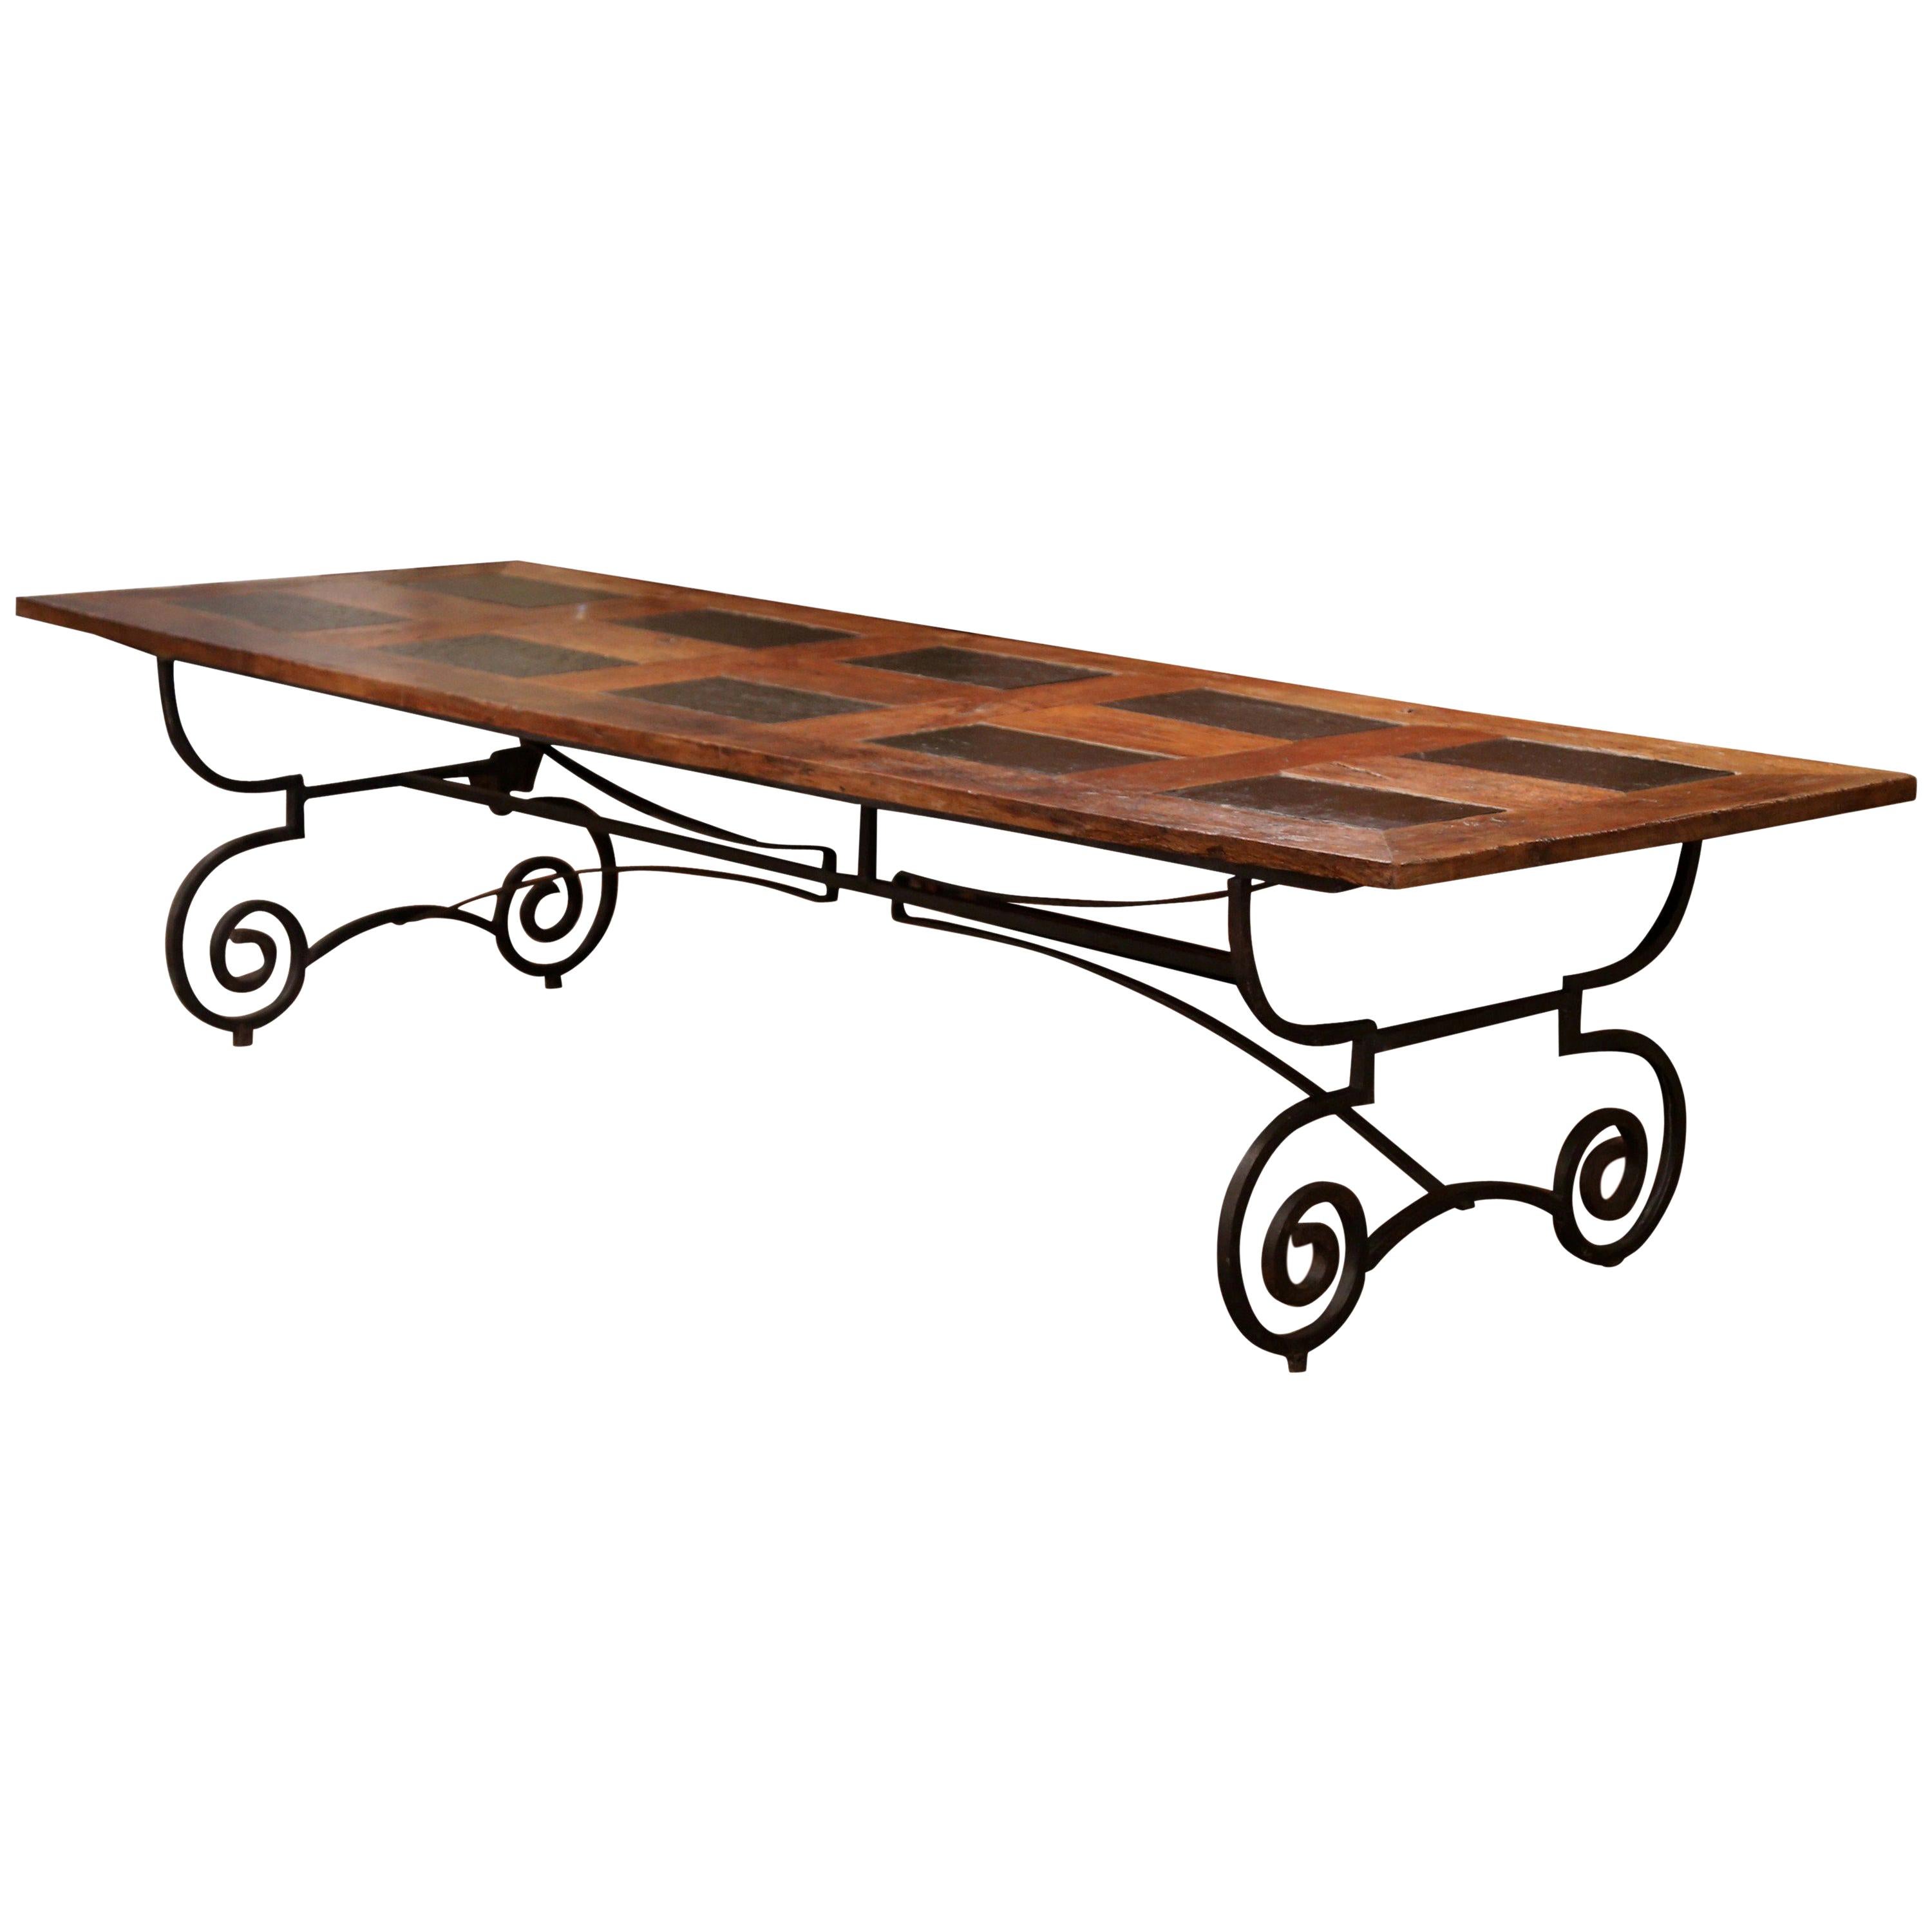 French Chestnut and Slate Dining Room Table on Forged Wrought Iron Base